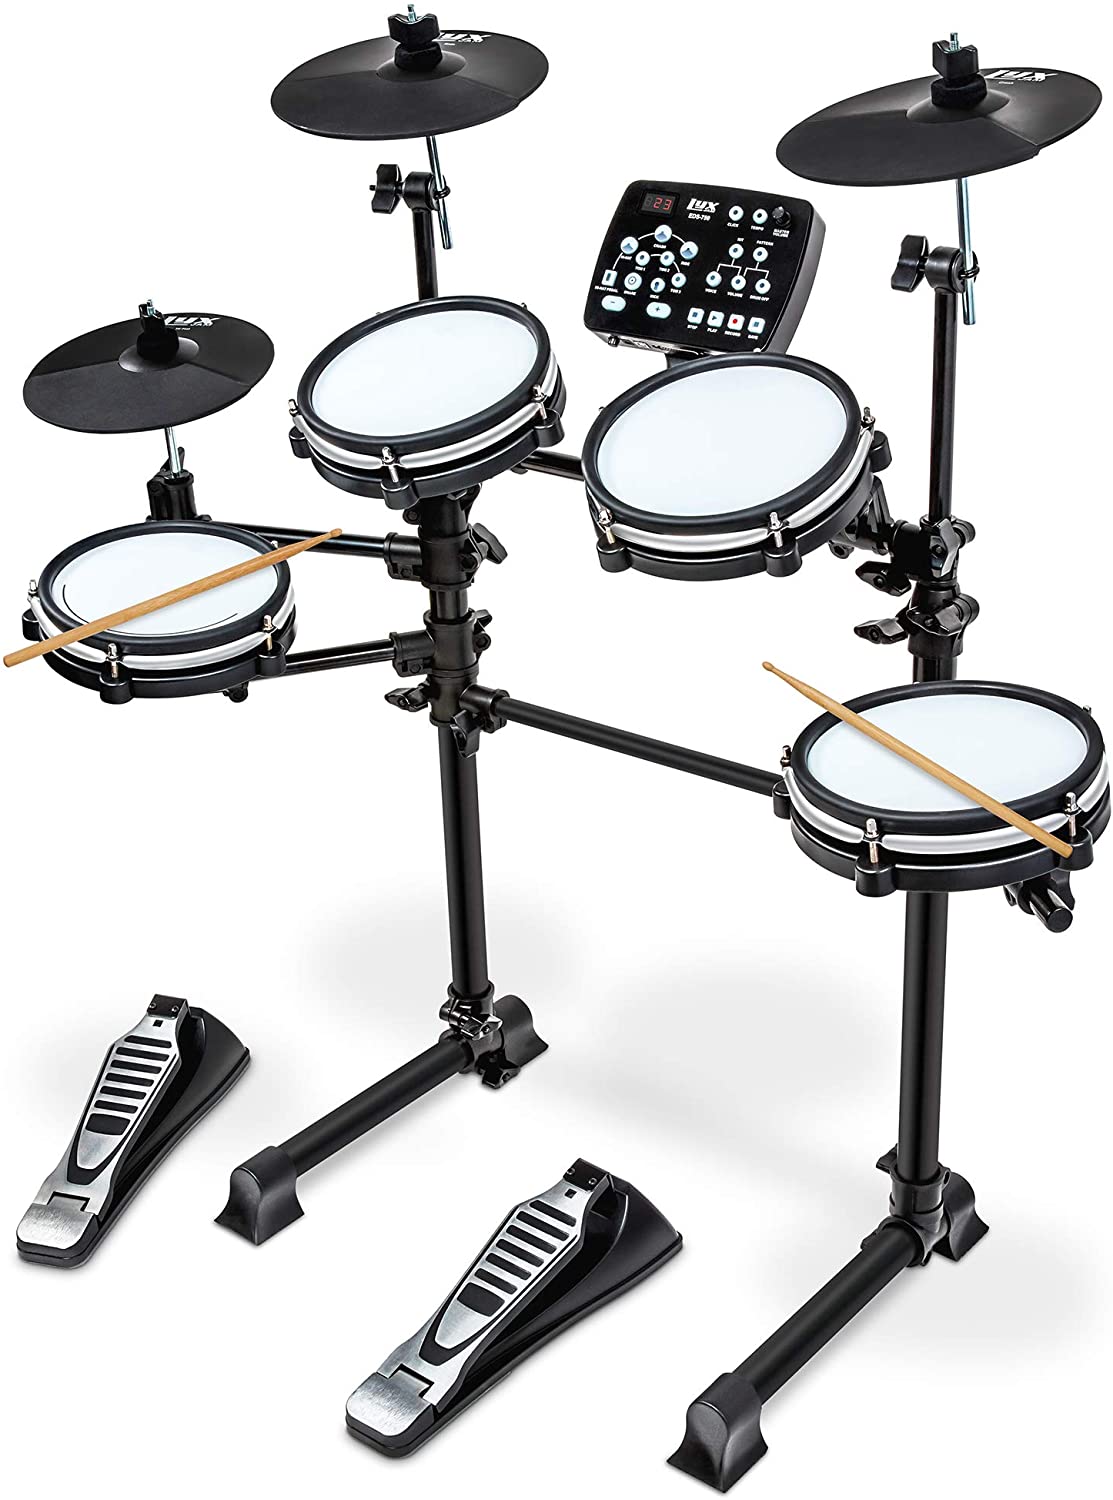 Best Affordable Electronic Drum Kit for Beginners and Part-time Players